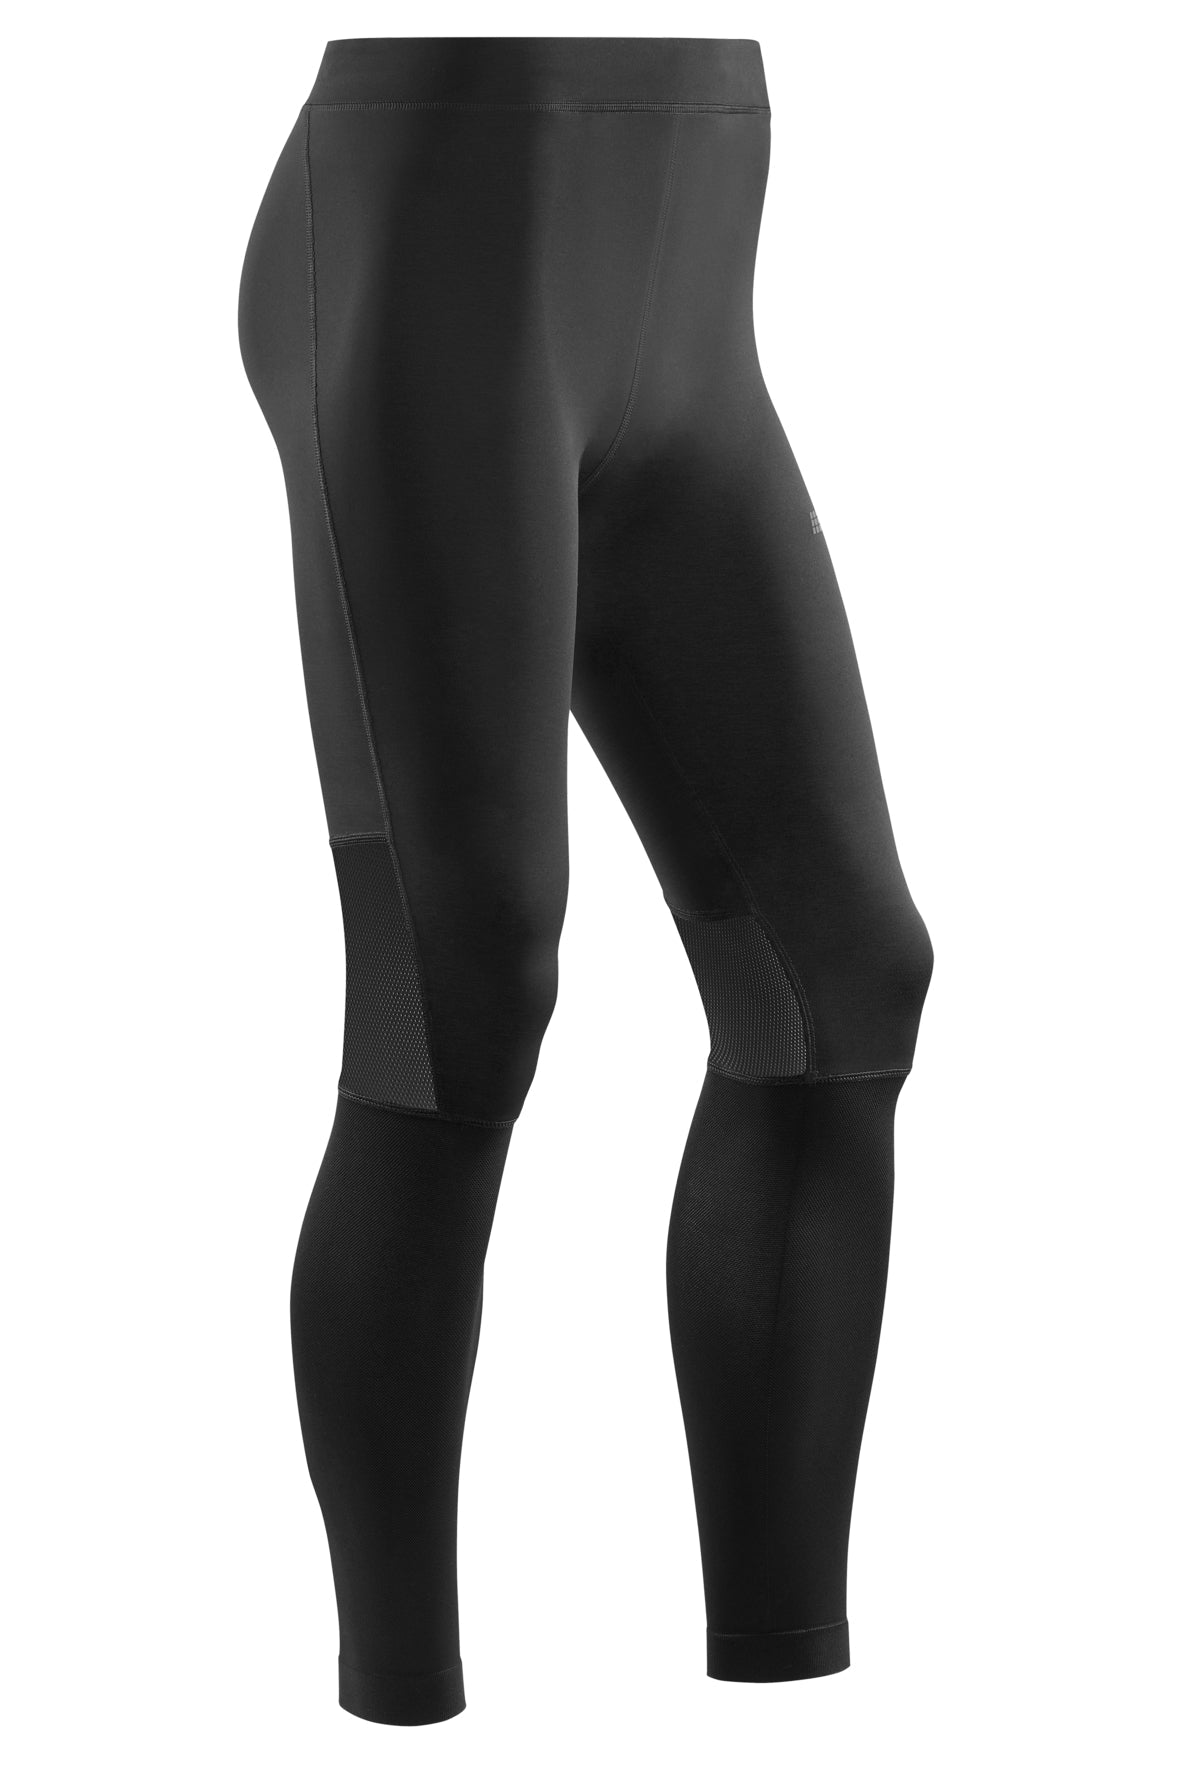 Weigos™ Weighted Performance Leggings by Curative Orthopaedics